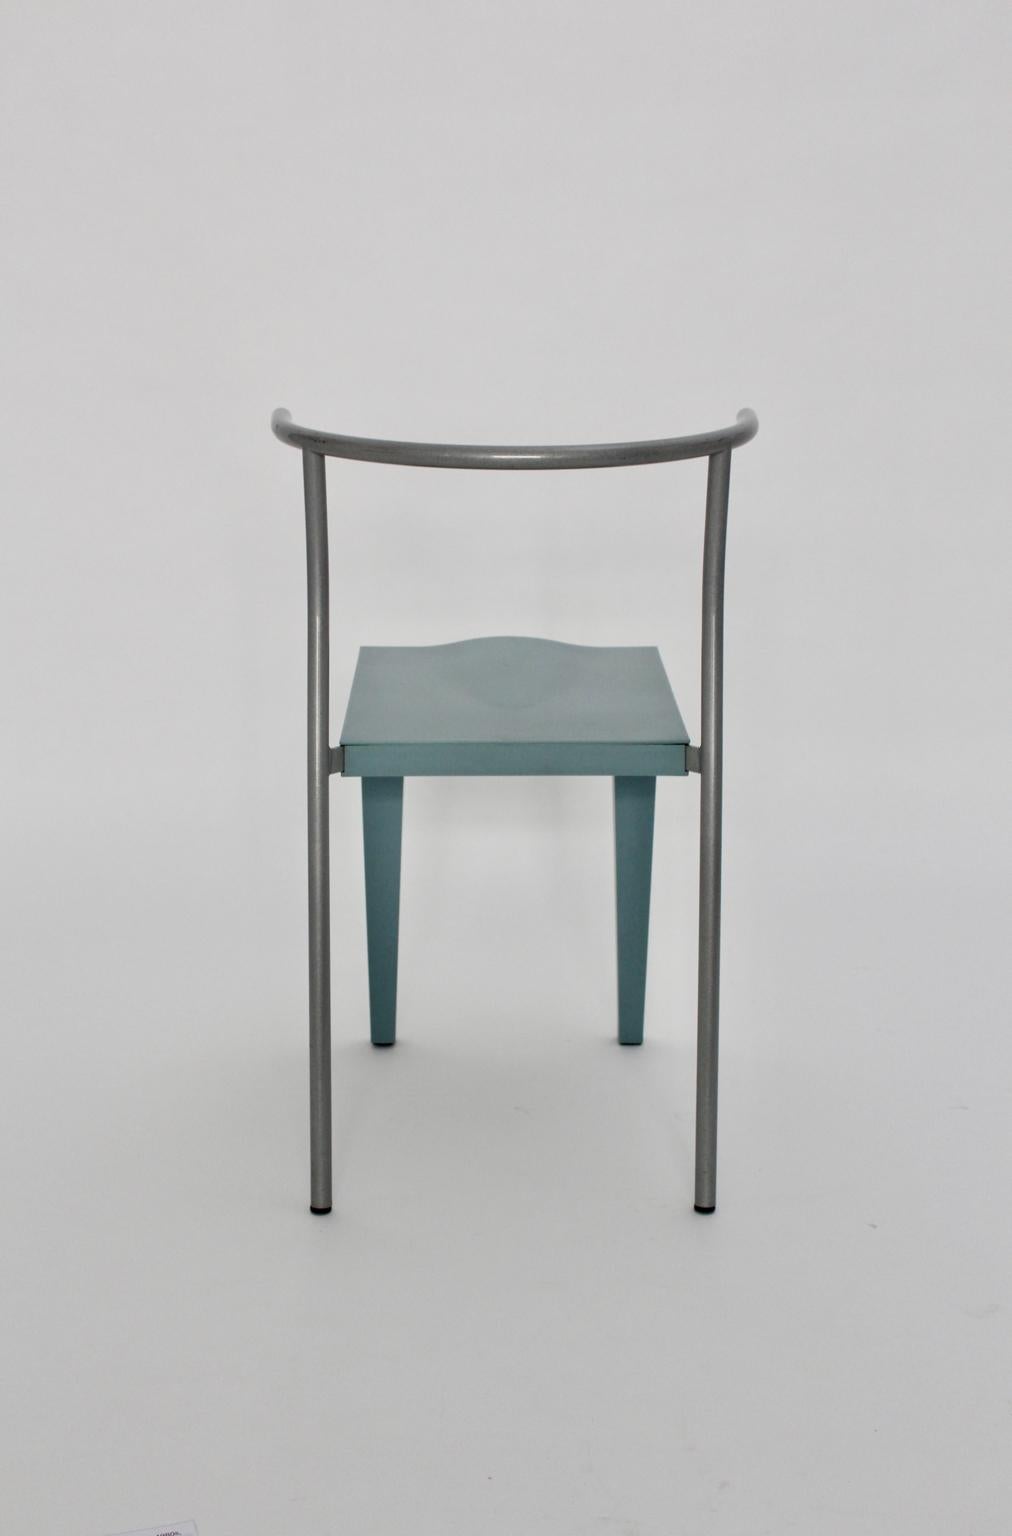 Italian Postmodern Blue Vintage Chair by Philippe Starck 1980s for Kartell Italy For Sale